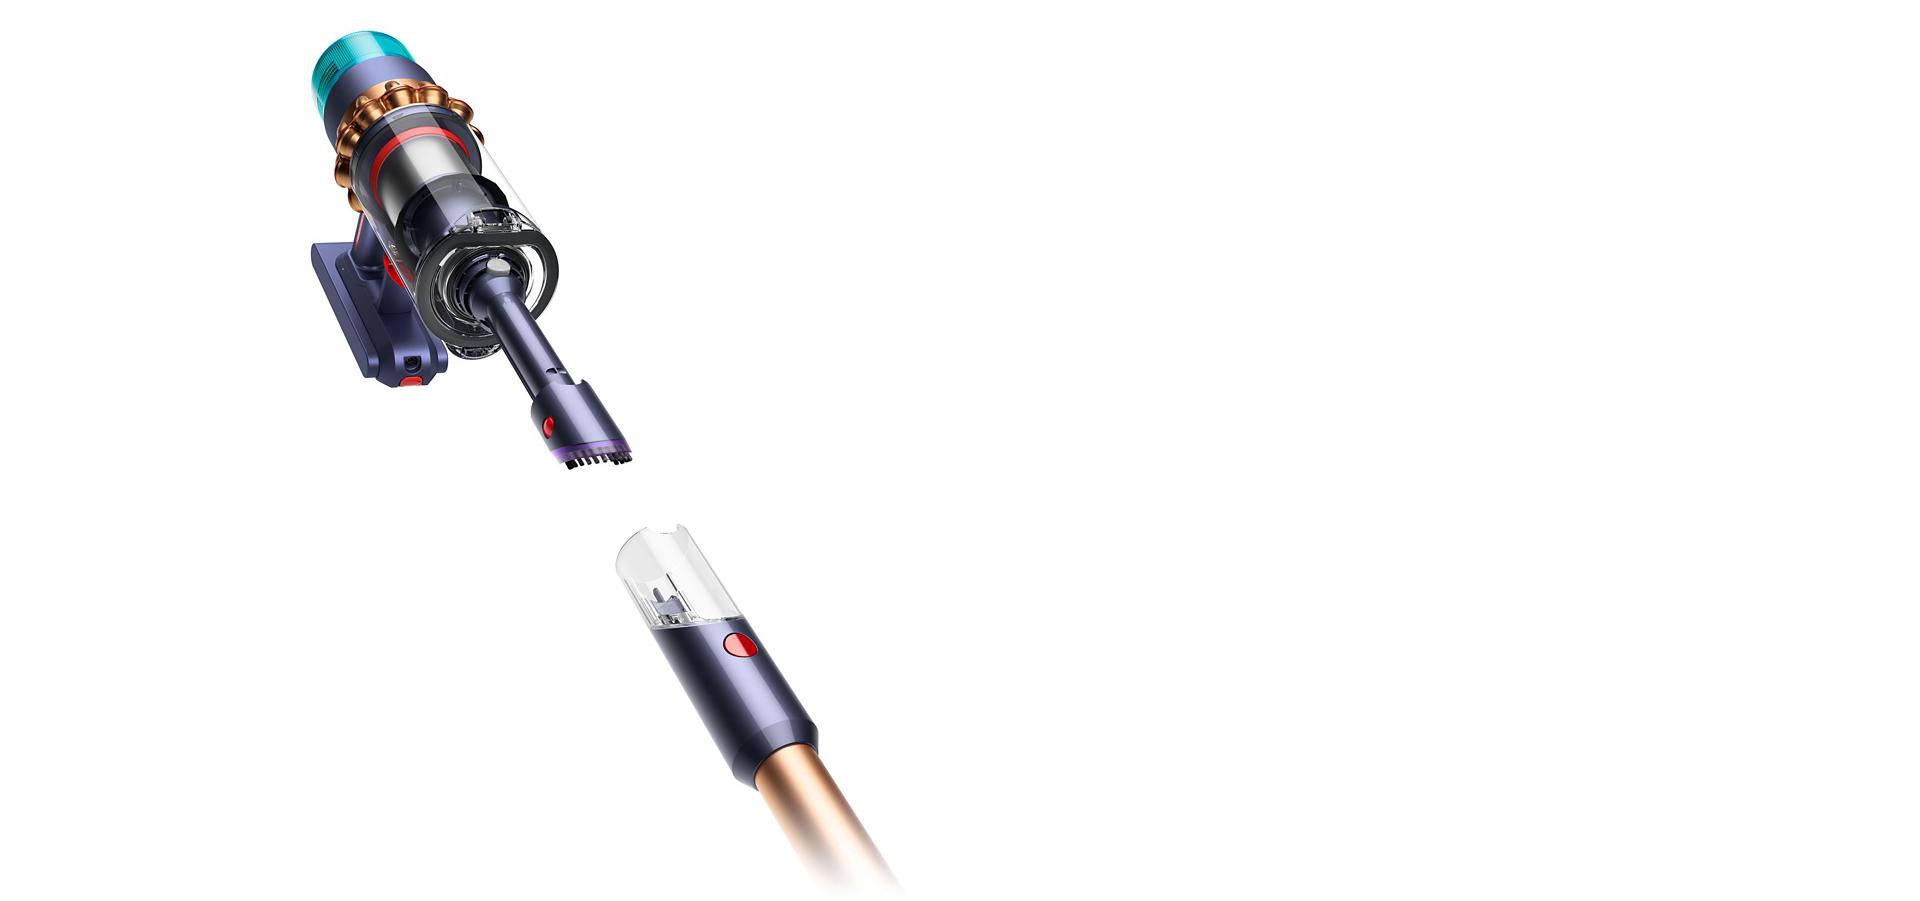 Dyson Gen5detect vacuum with Built-in dusting and crevice tool.